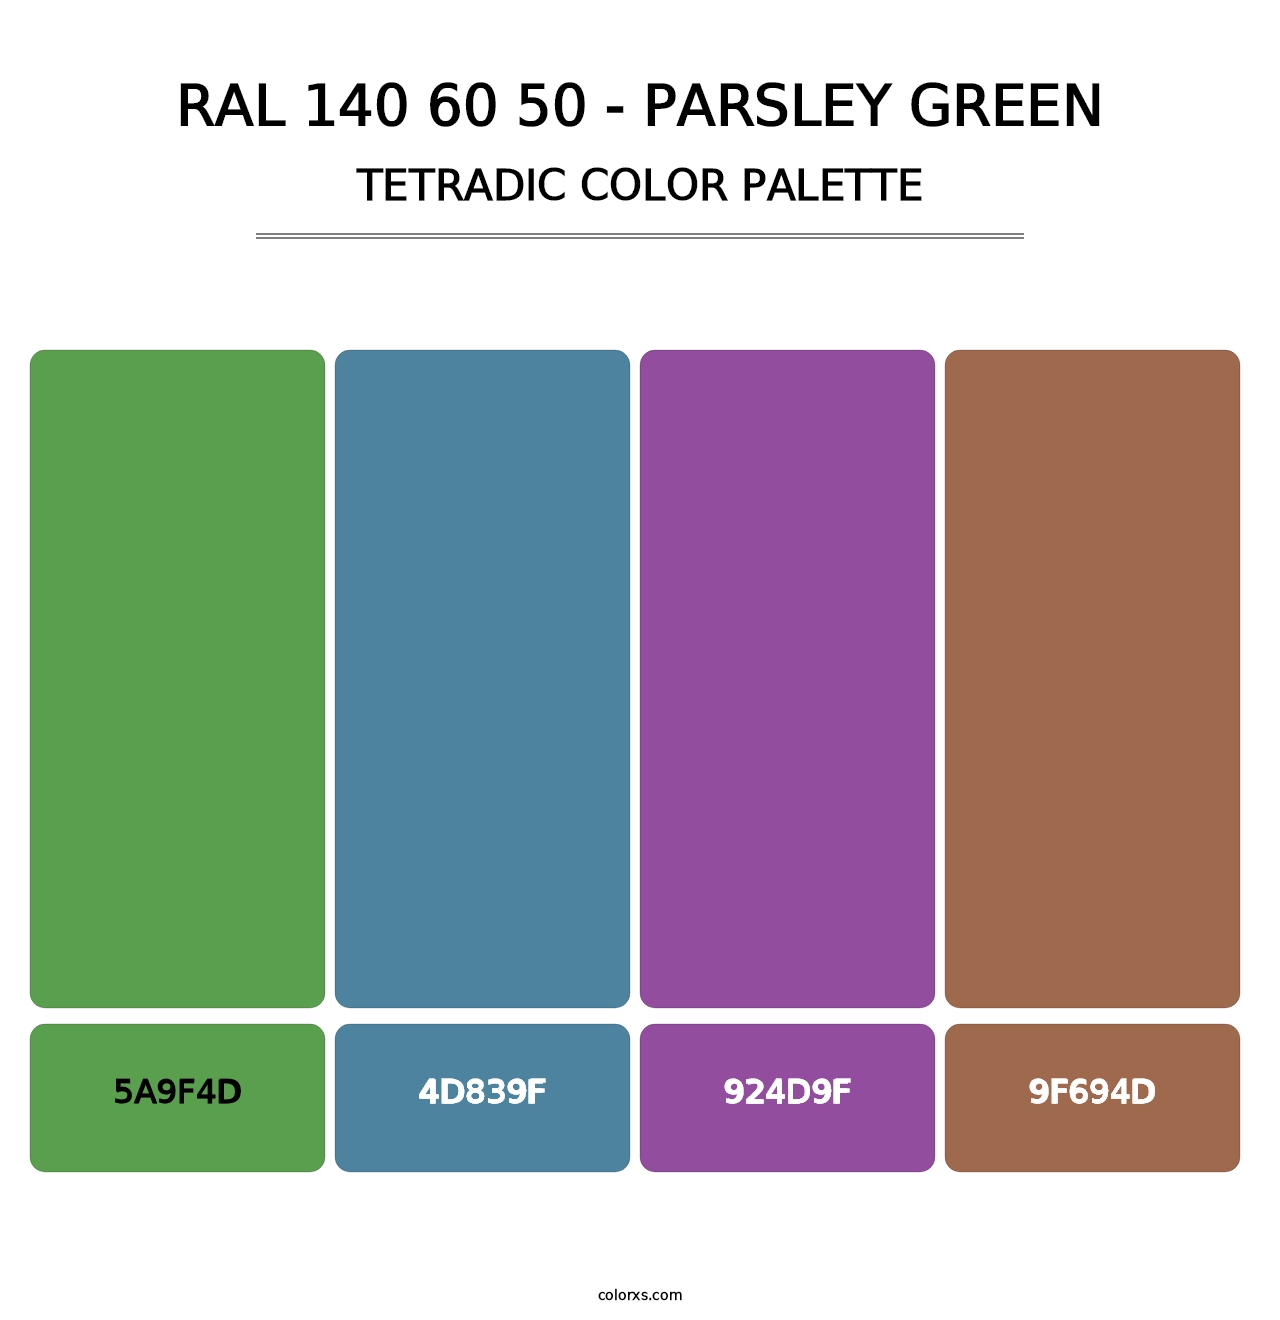 RAL 140 60 50 - Parsley Green - Tetradic Color Palette